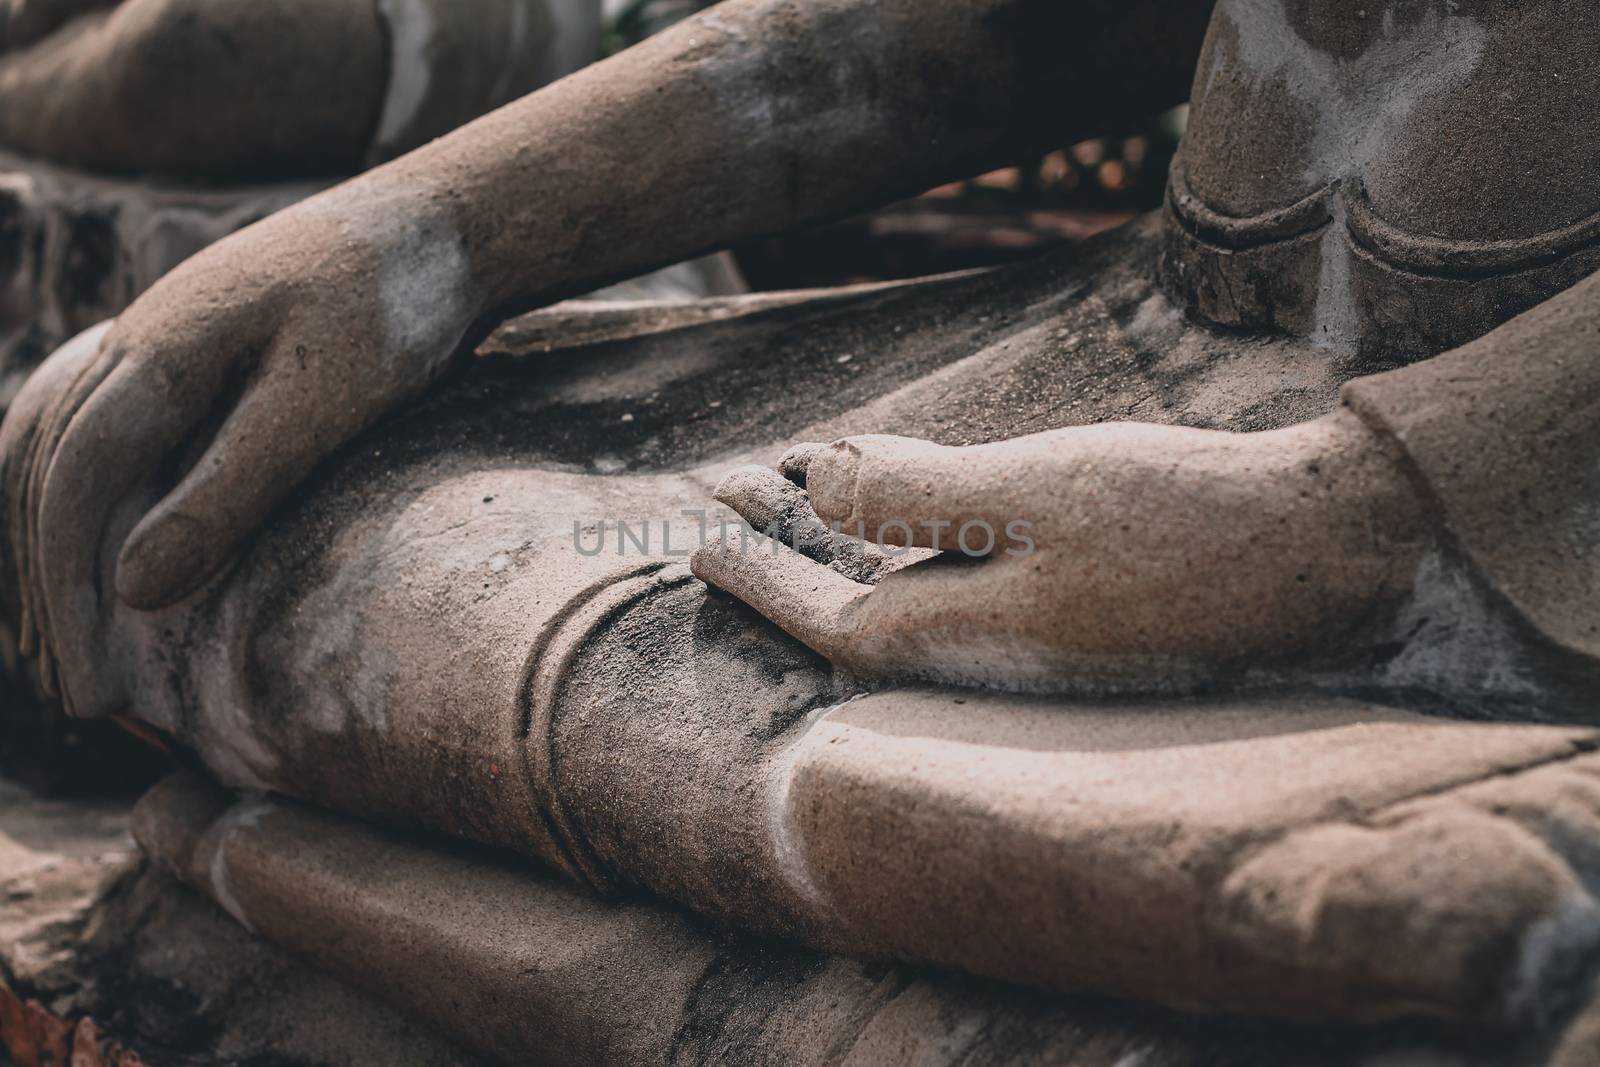 Buddha Statue Hand in Meditation Pose by Sonnet15